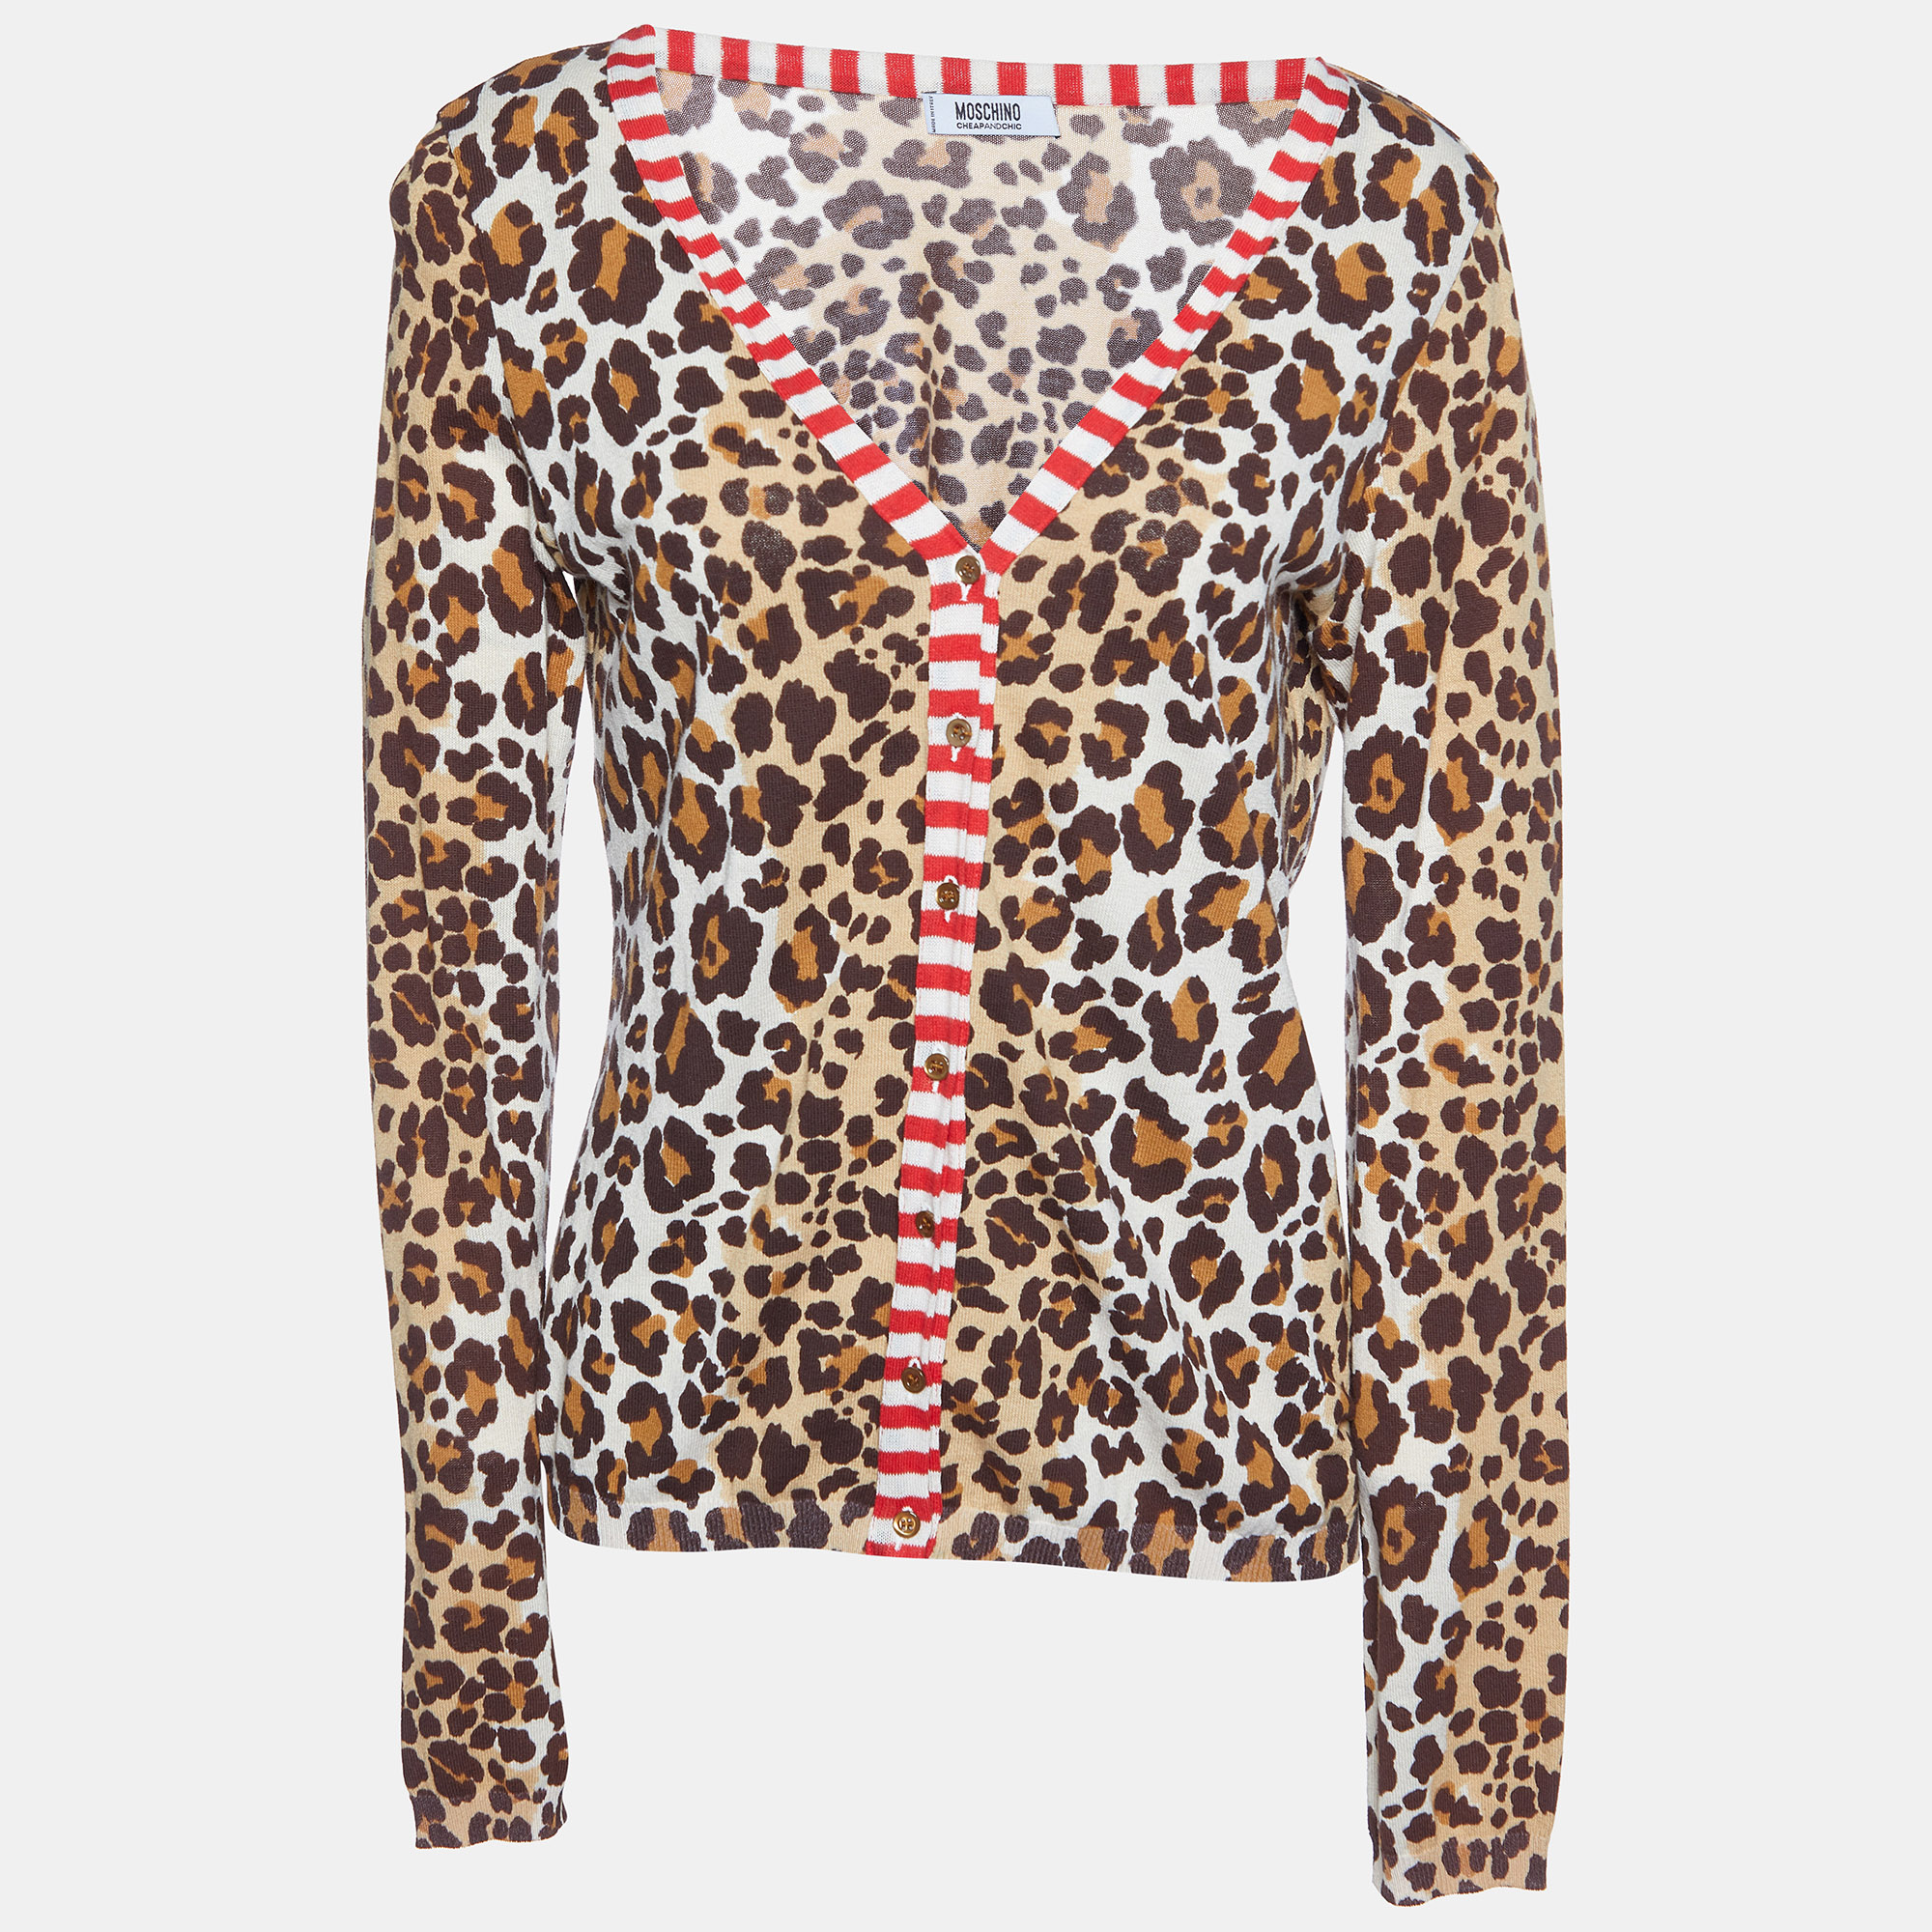 Pre-owned Moschino Cheap And Chic Brown Animal Printed Cotton Knit Cardigan M